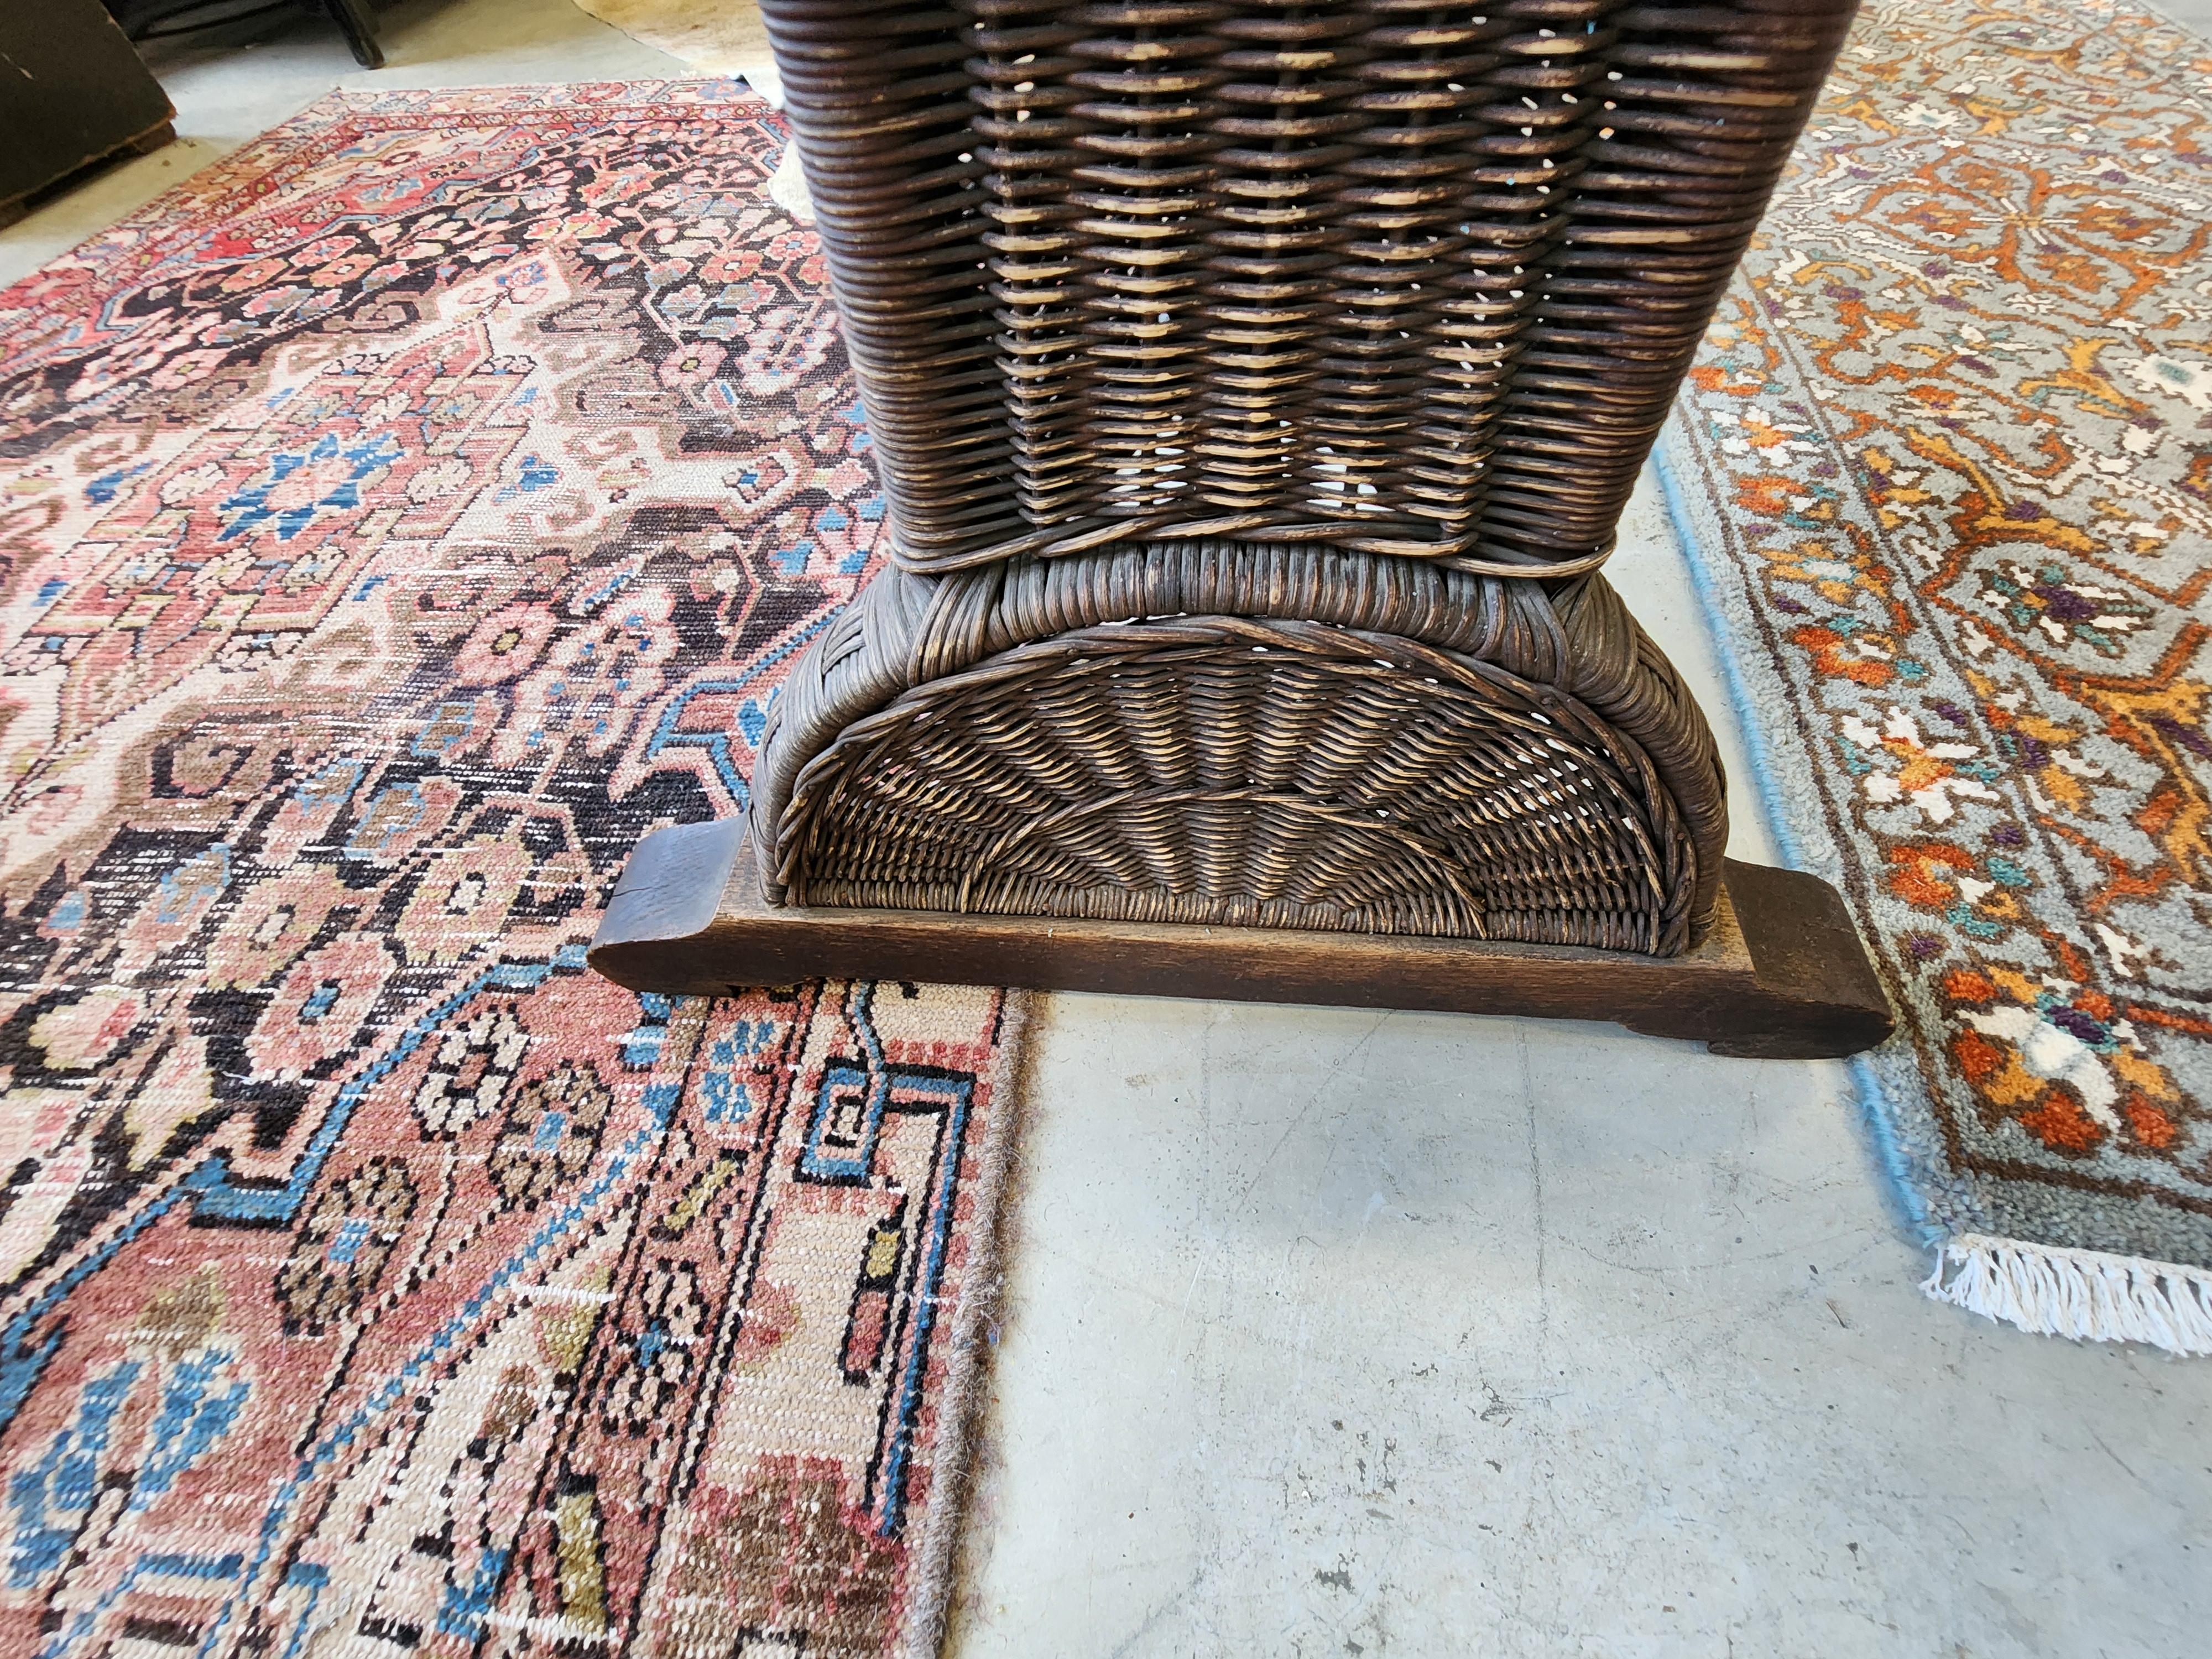 Heywood Wakefield library table. With quarter sawn, oak top and woven wicker pedestal legs, apron, and stretcher. This wicker table drew on the Aesthetic Movement and Japanese influences; simpler designs arose in the wake of the Arts and Crafts